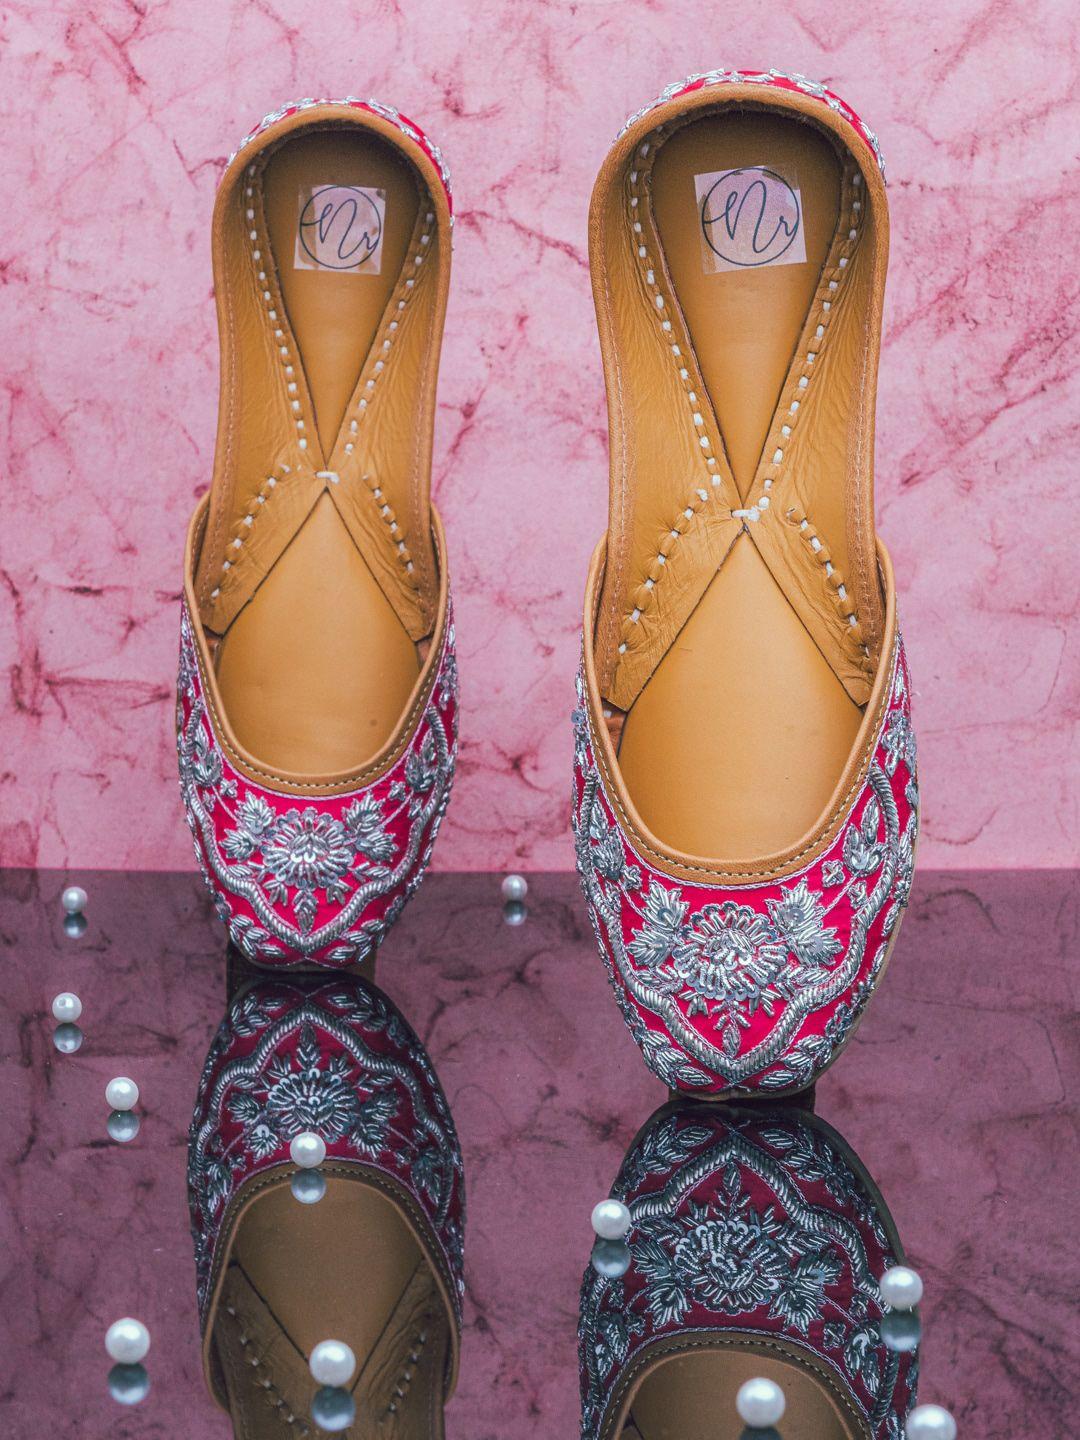 nr-by-nidhi-rathi-women-pink-hand-embroidered-mojaris-flats